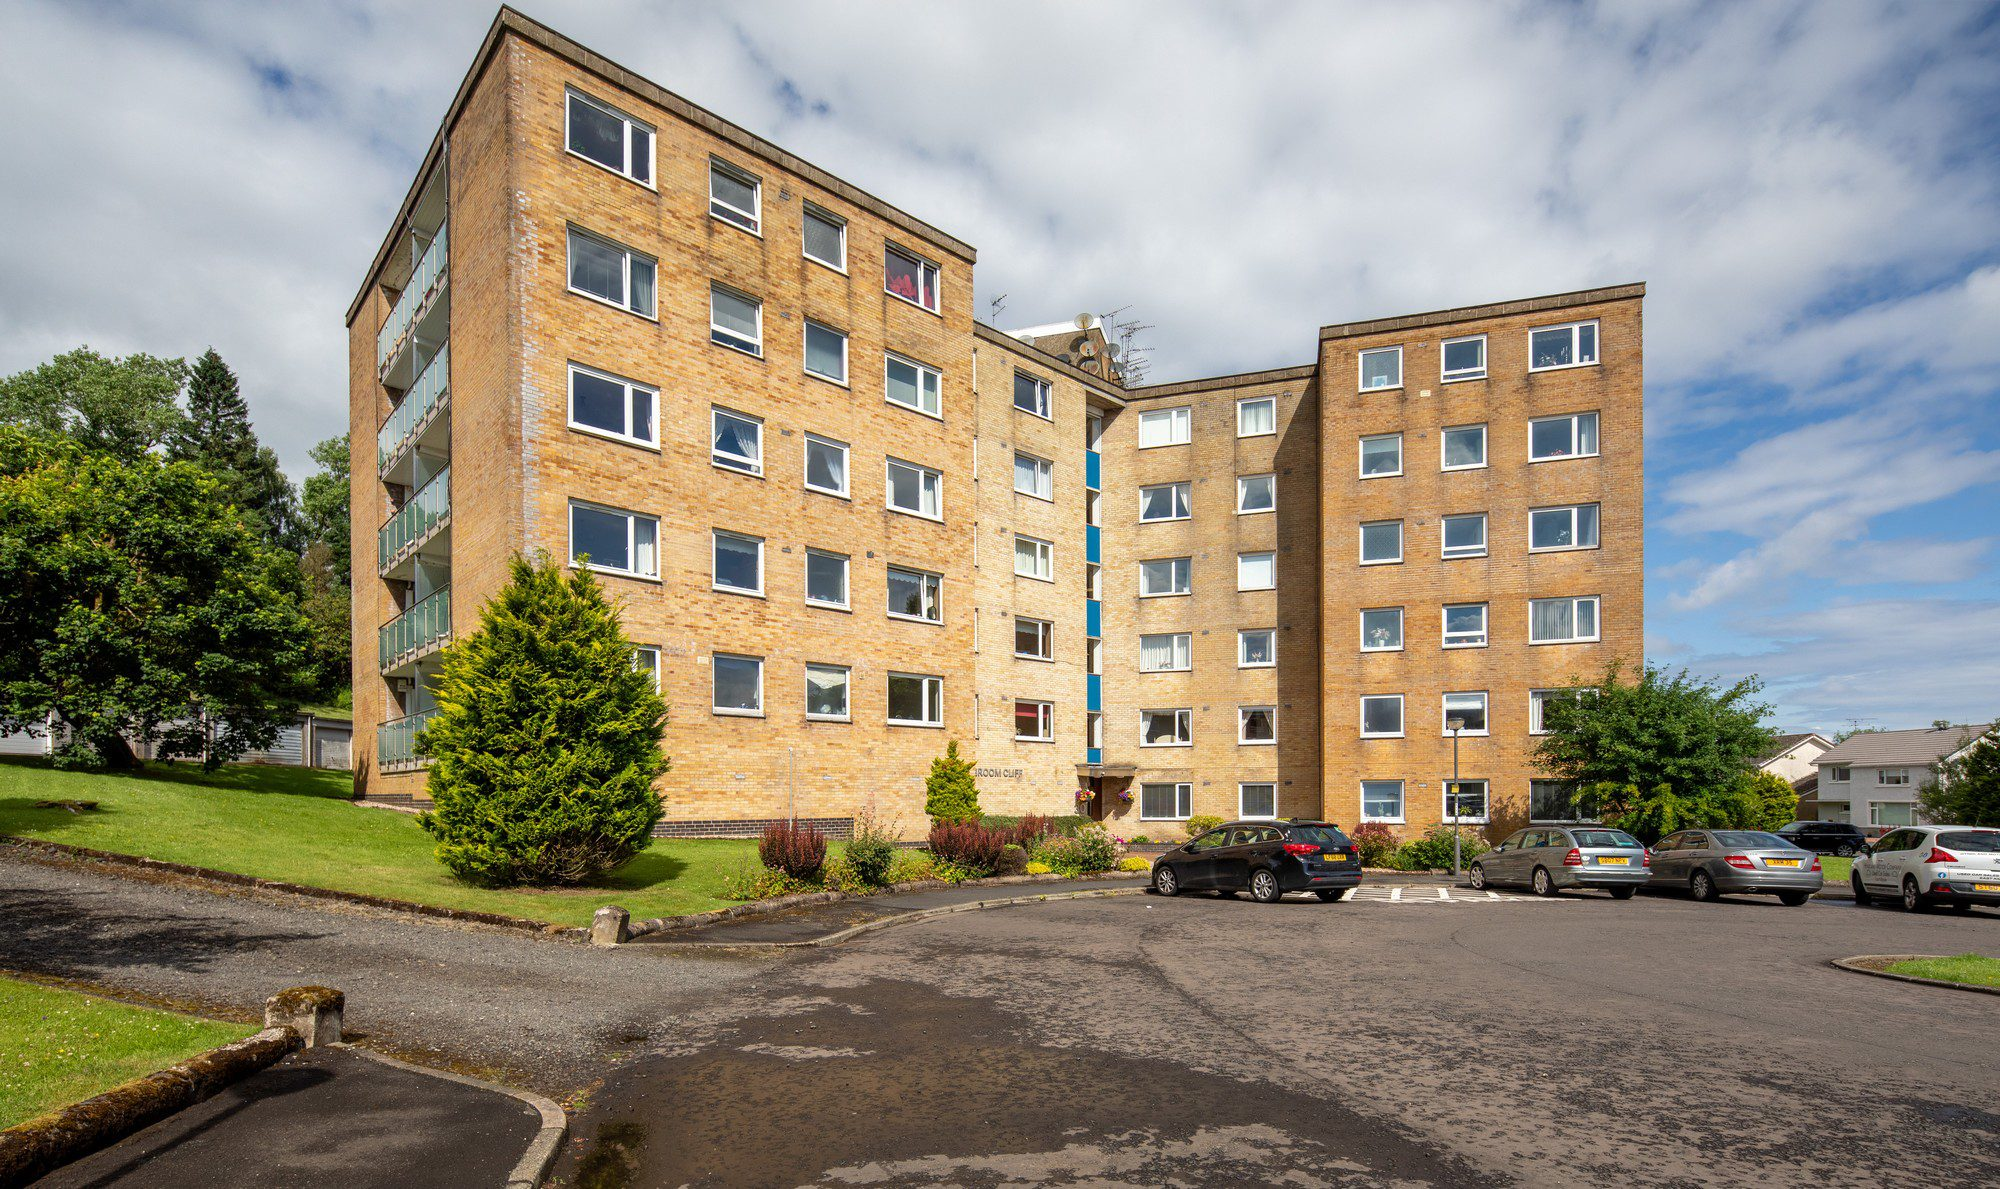 fifth floor flat for sale in newton Mearns with easy access